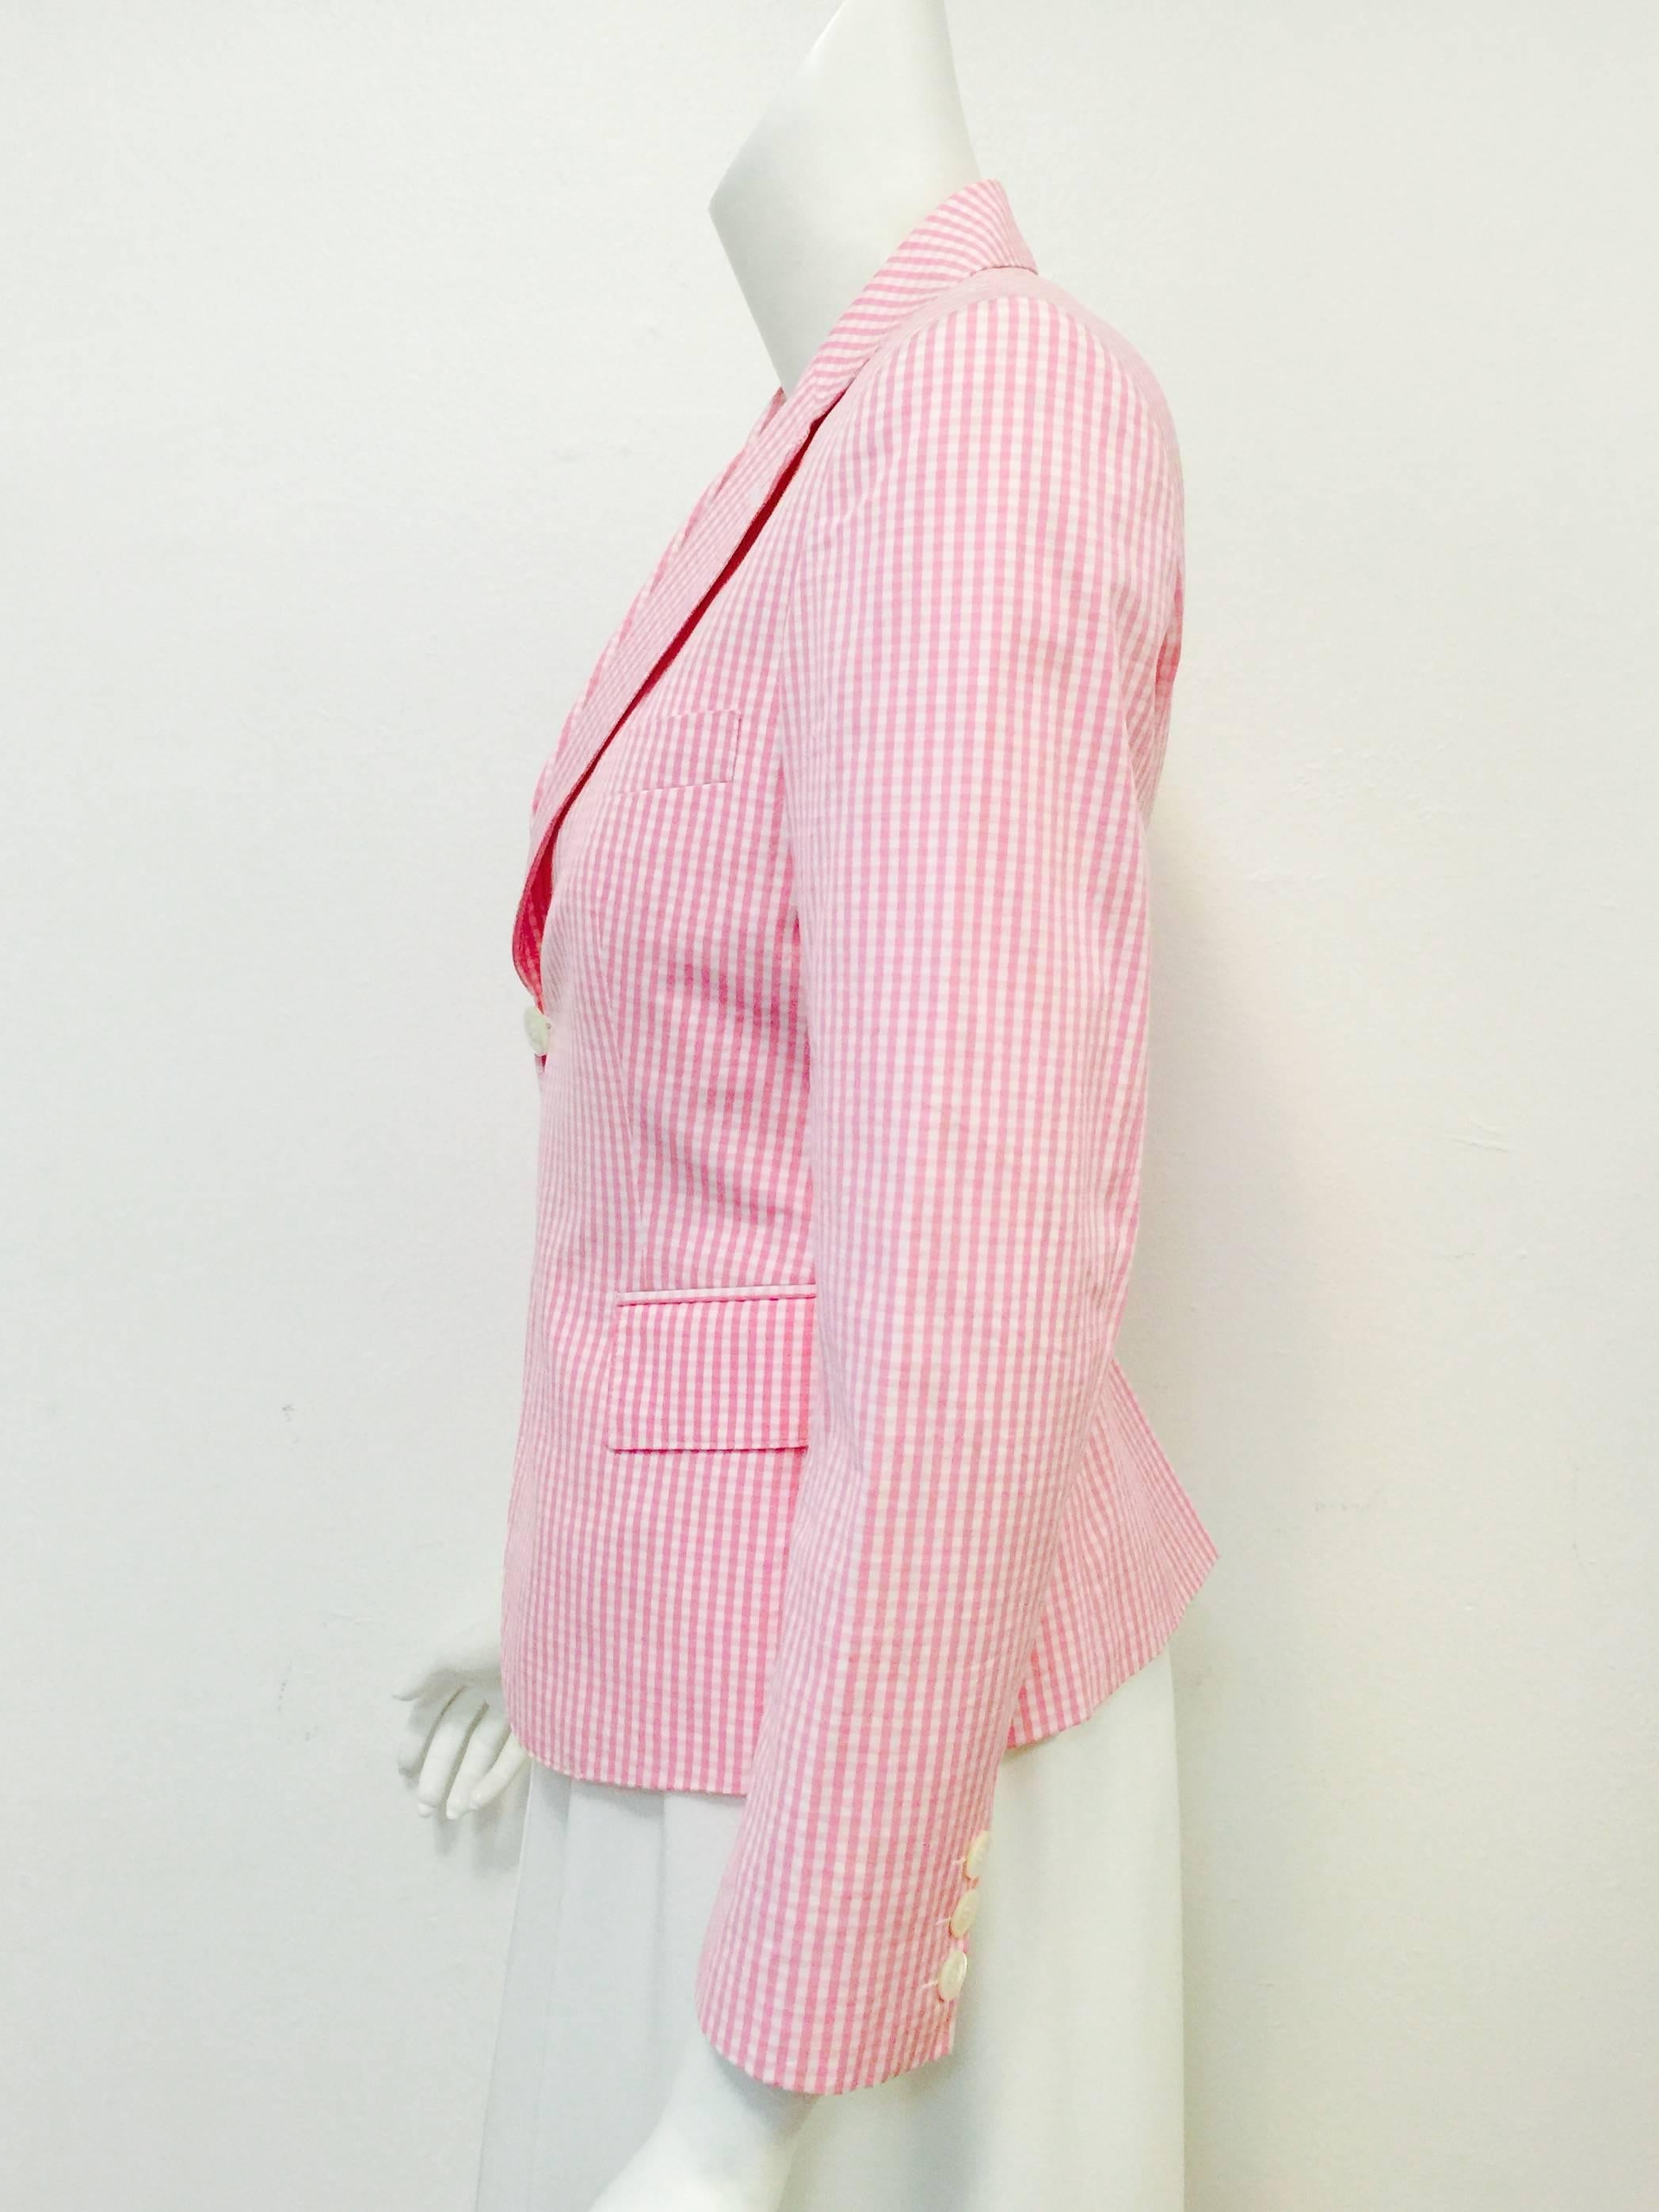 Women's Comme des Garcons by Junya Watanabe Pink and White Gingham Blazer